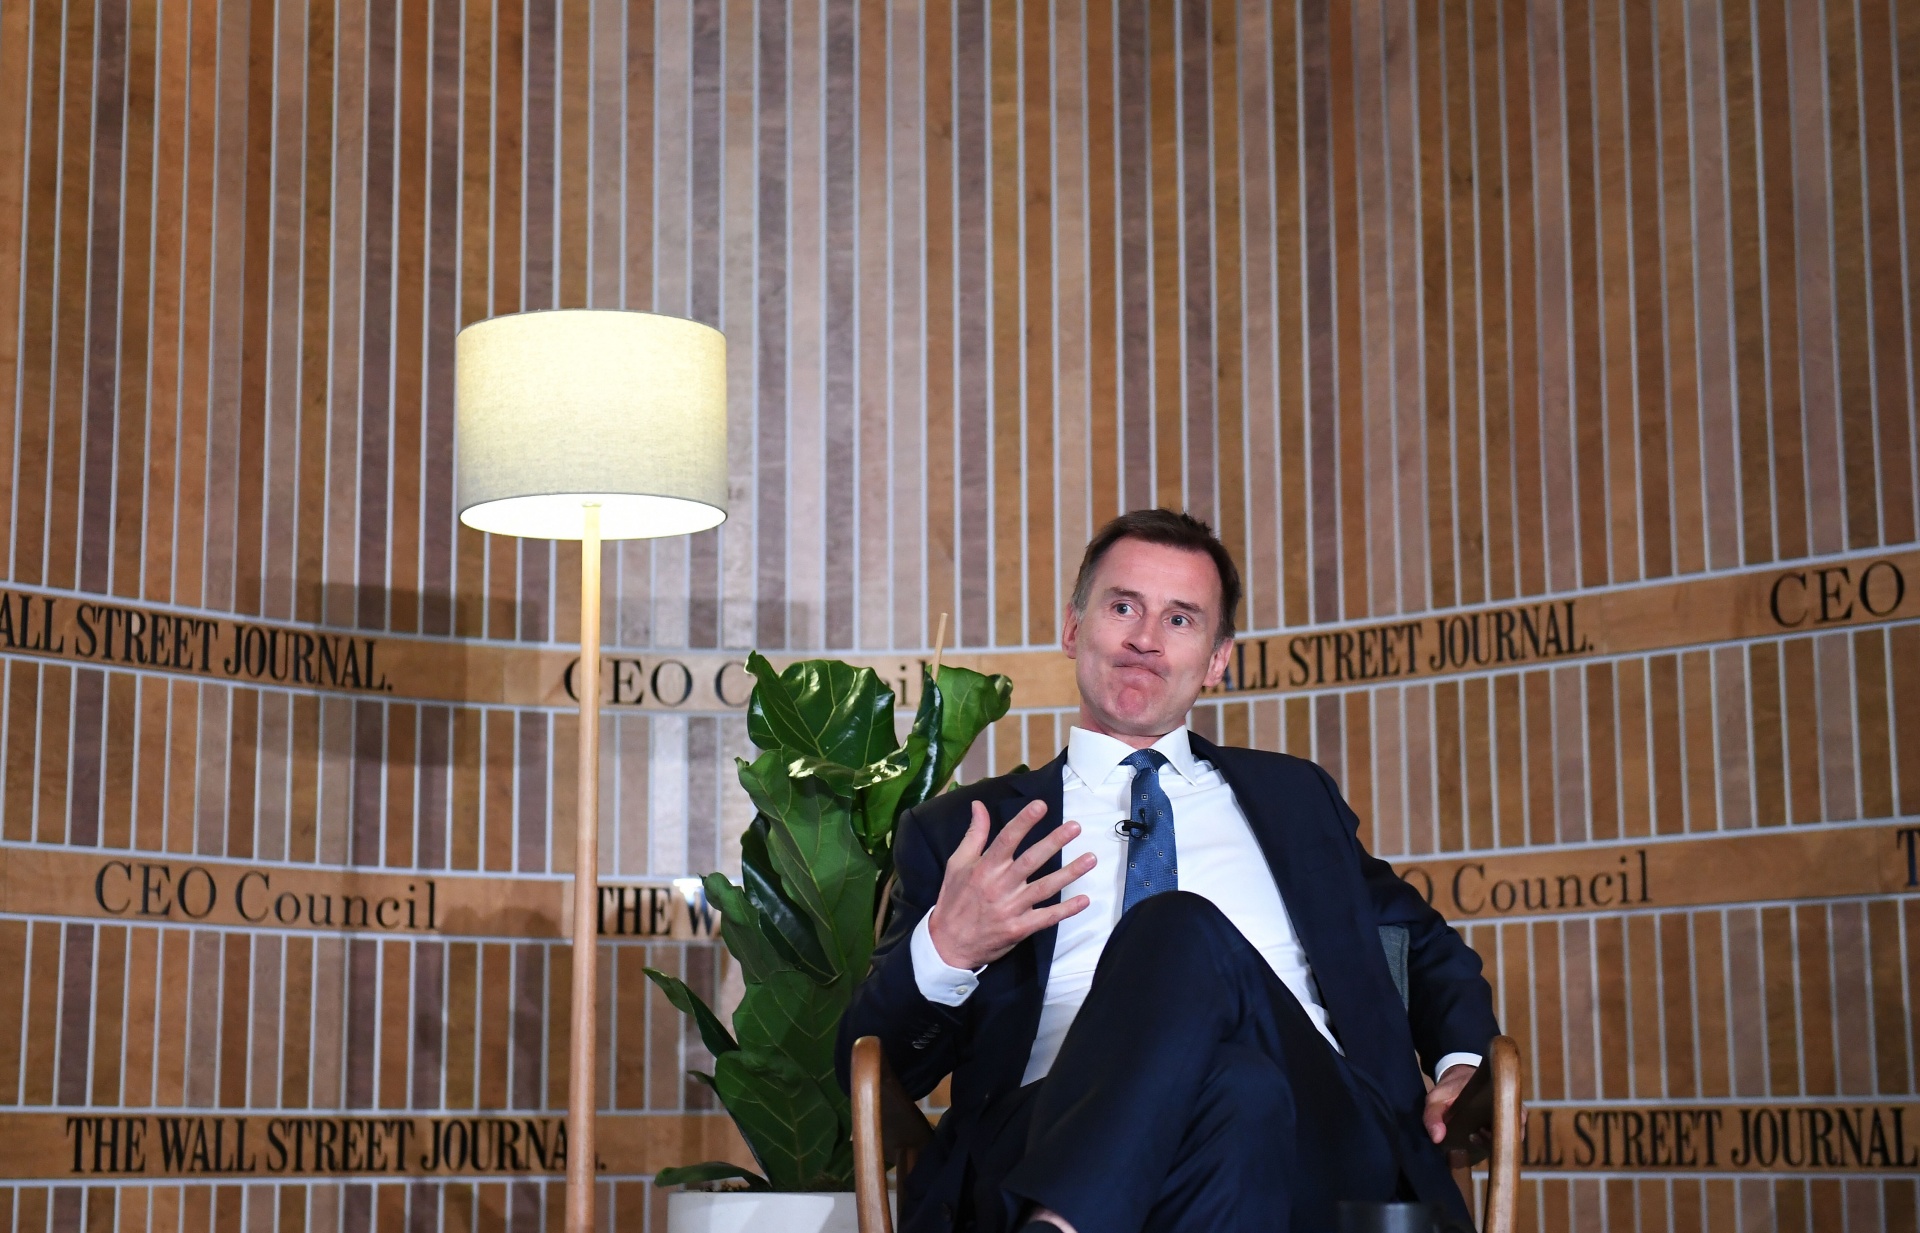 Foreign Secretary Jeremy Hunt speaking at the Wall Street Journal CEO council meeting at the Rosewood Hotel in May